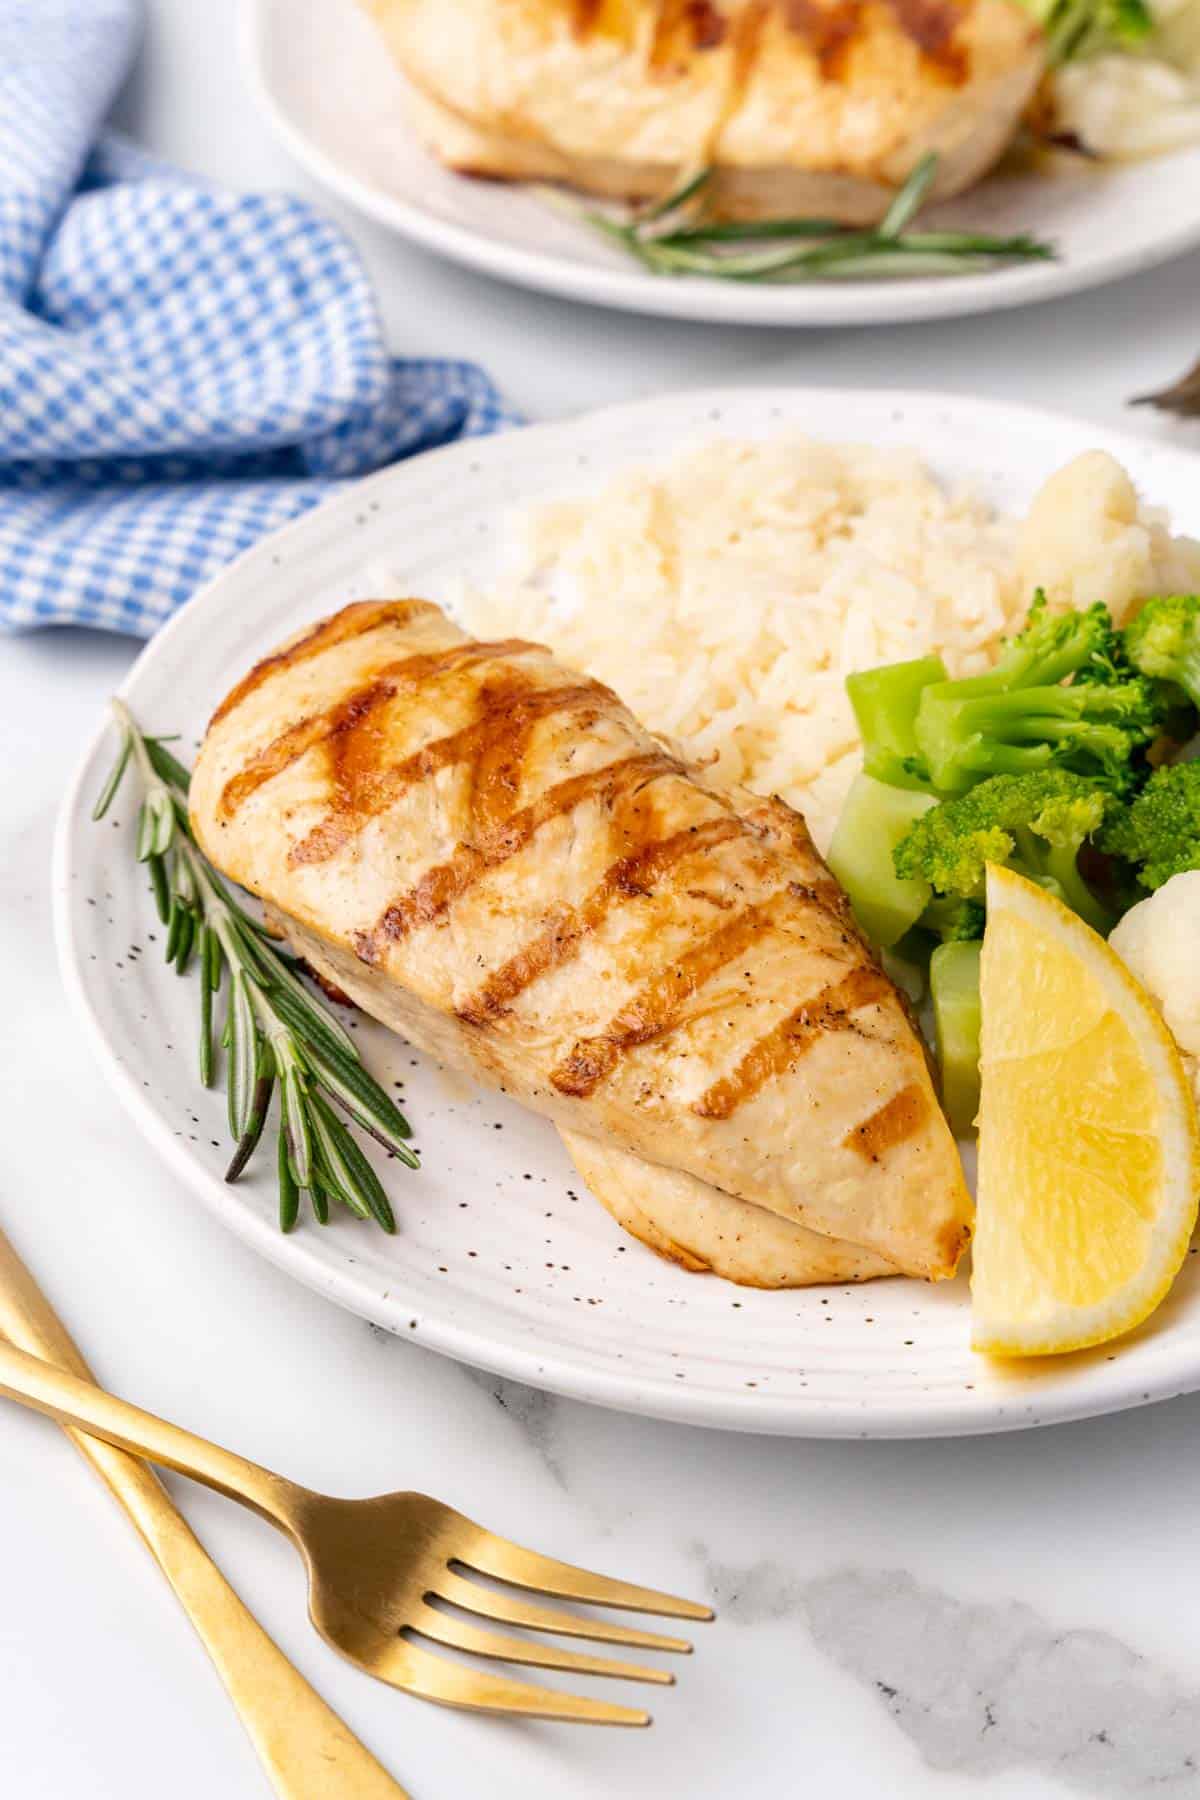 Side angle of chicken breast on a white speckled plate next to a rosemary sprig, lemon wedge, steamed broccoli, and mashed potatoes; golden fork to the side of the plate